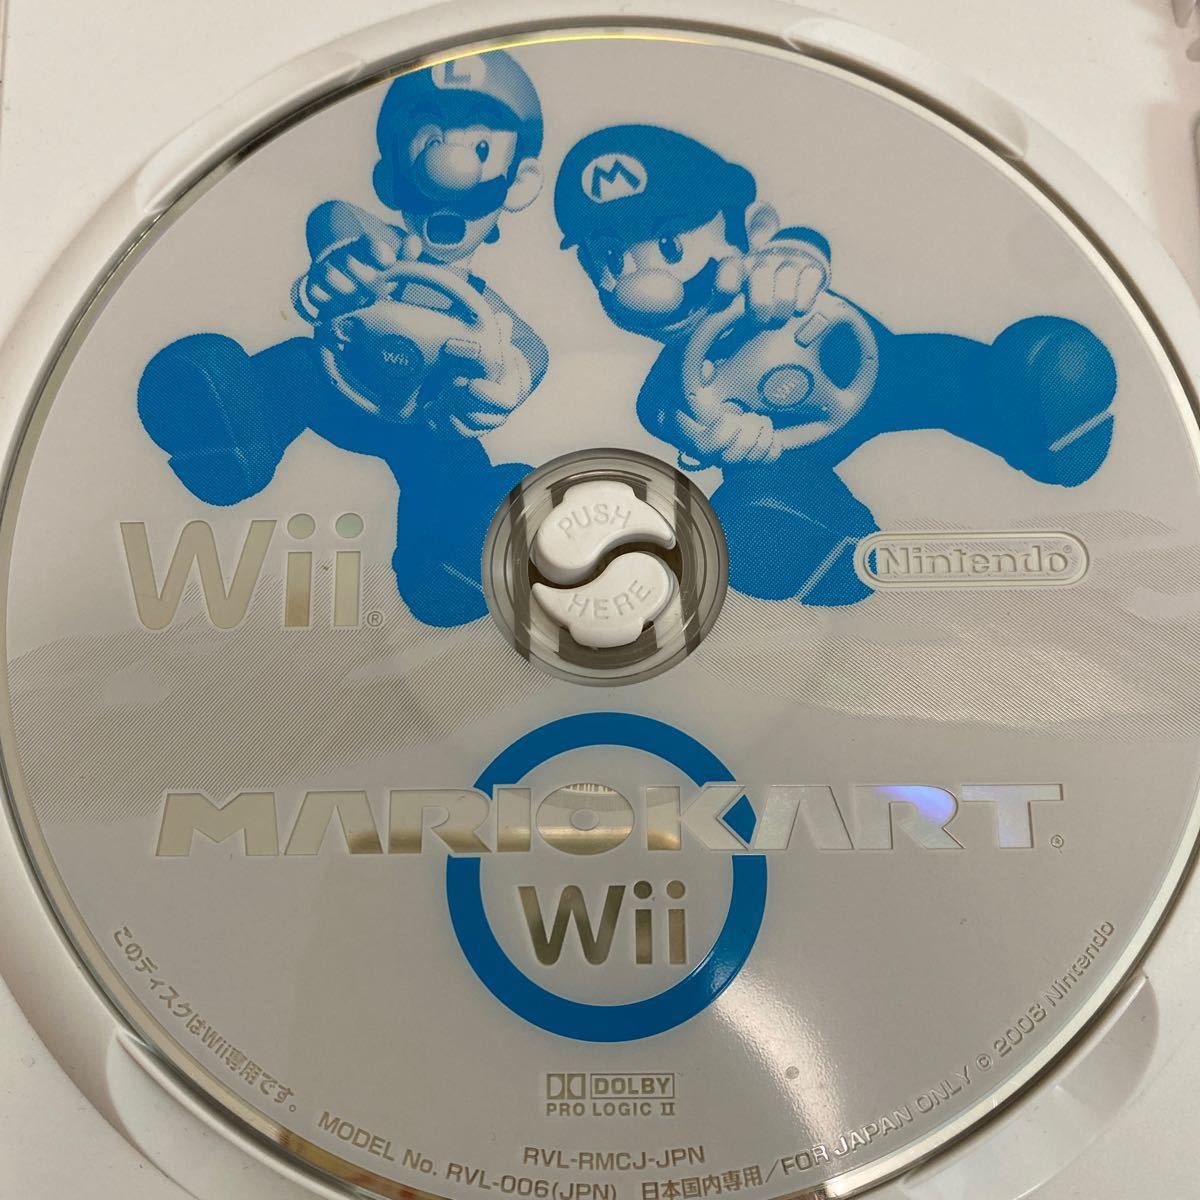 Wiiソフト マリオカートWii マリオカート 任天堂 Wiiマリオカート ソフト Wii